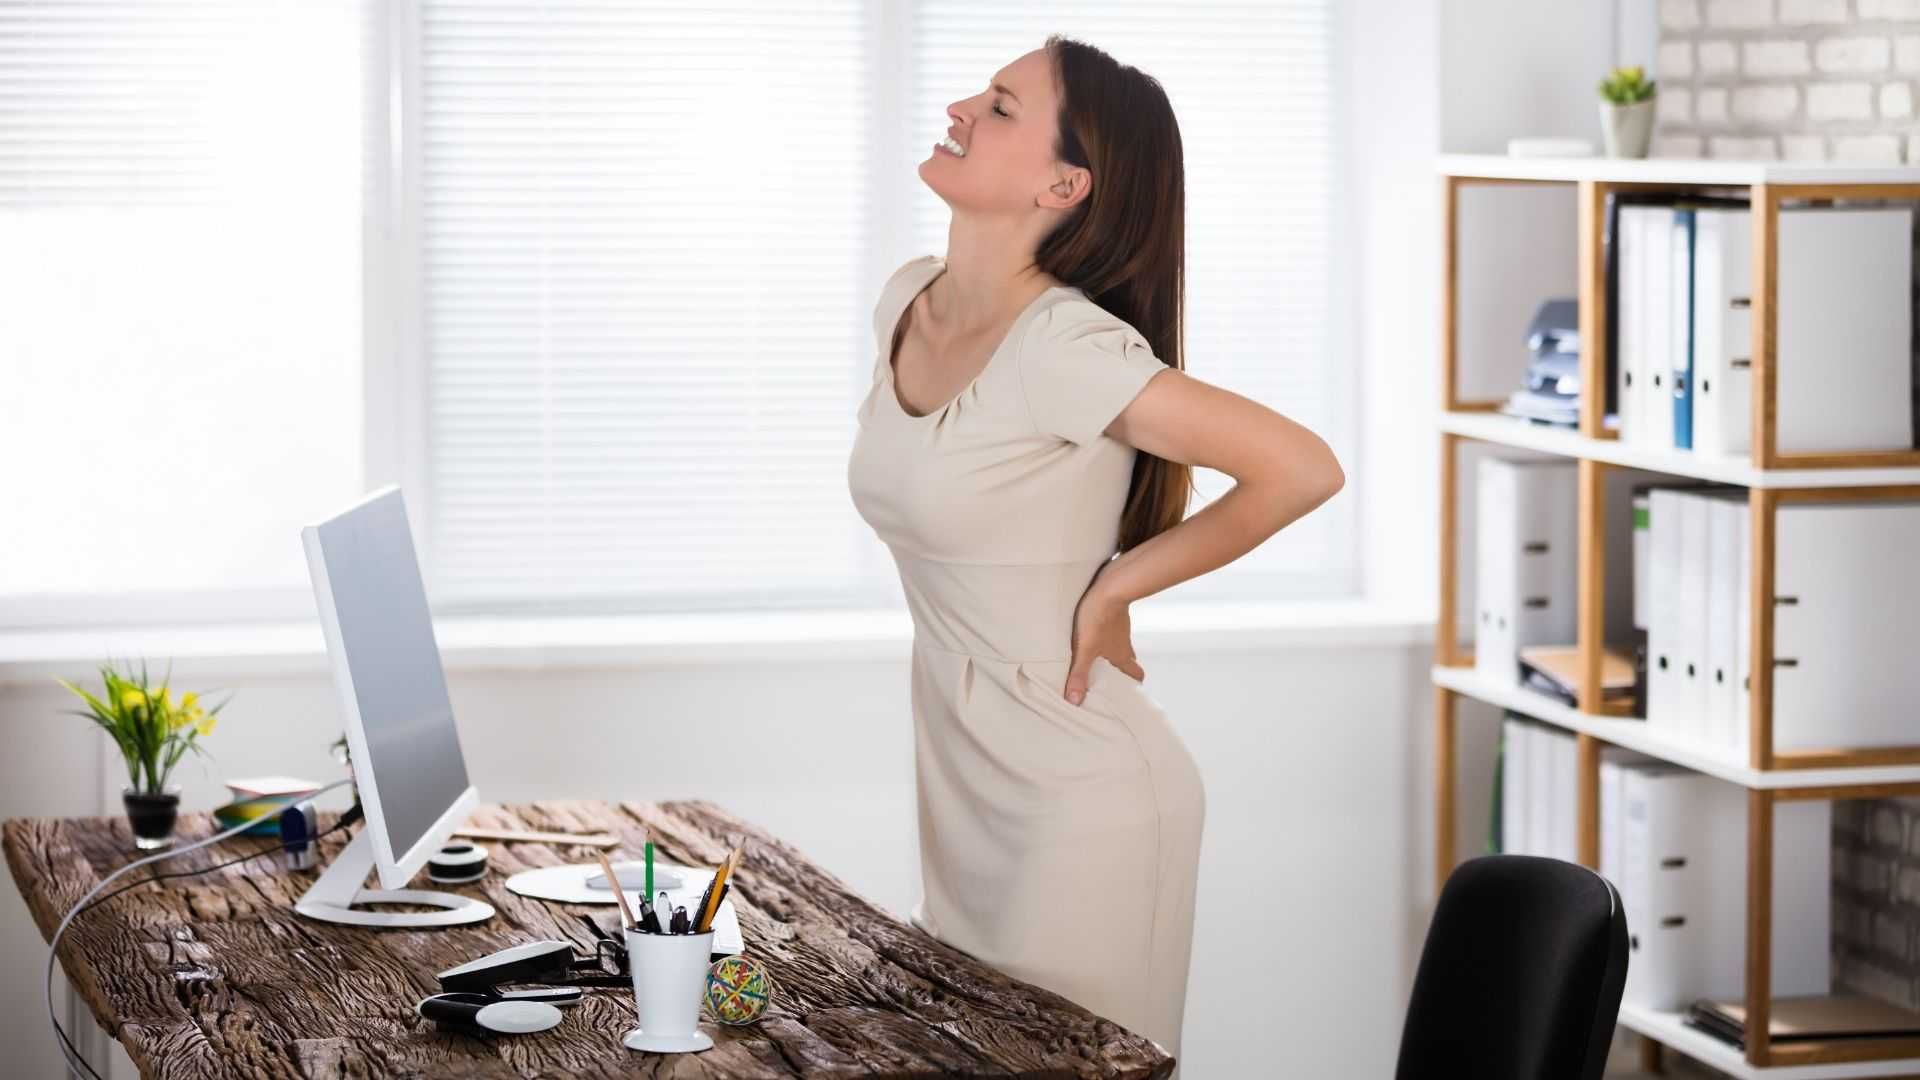 Sciatica Treatment in Kansas City: 3 Injuries That Can Cause Sciatica Pain